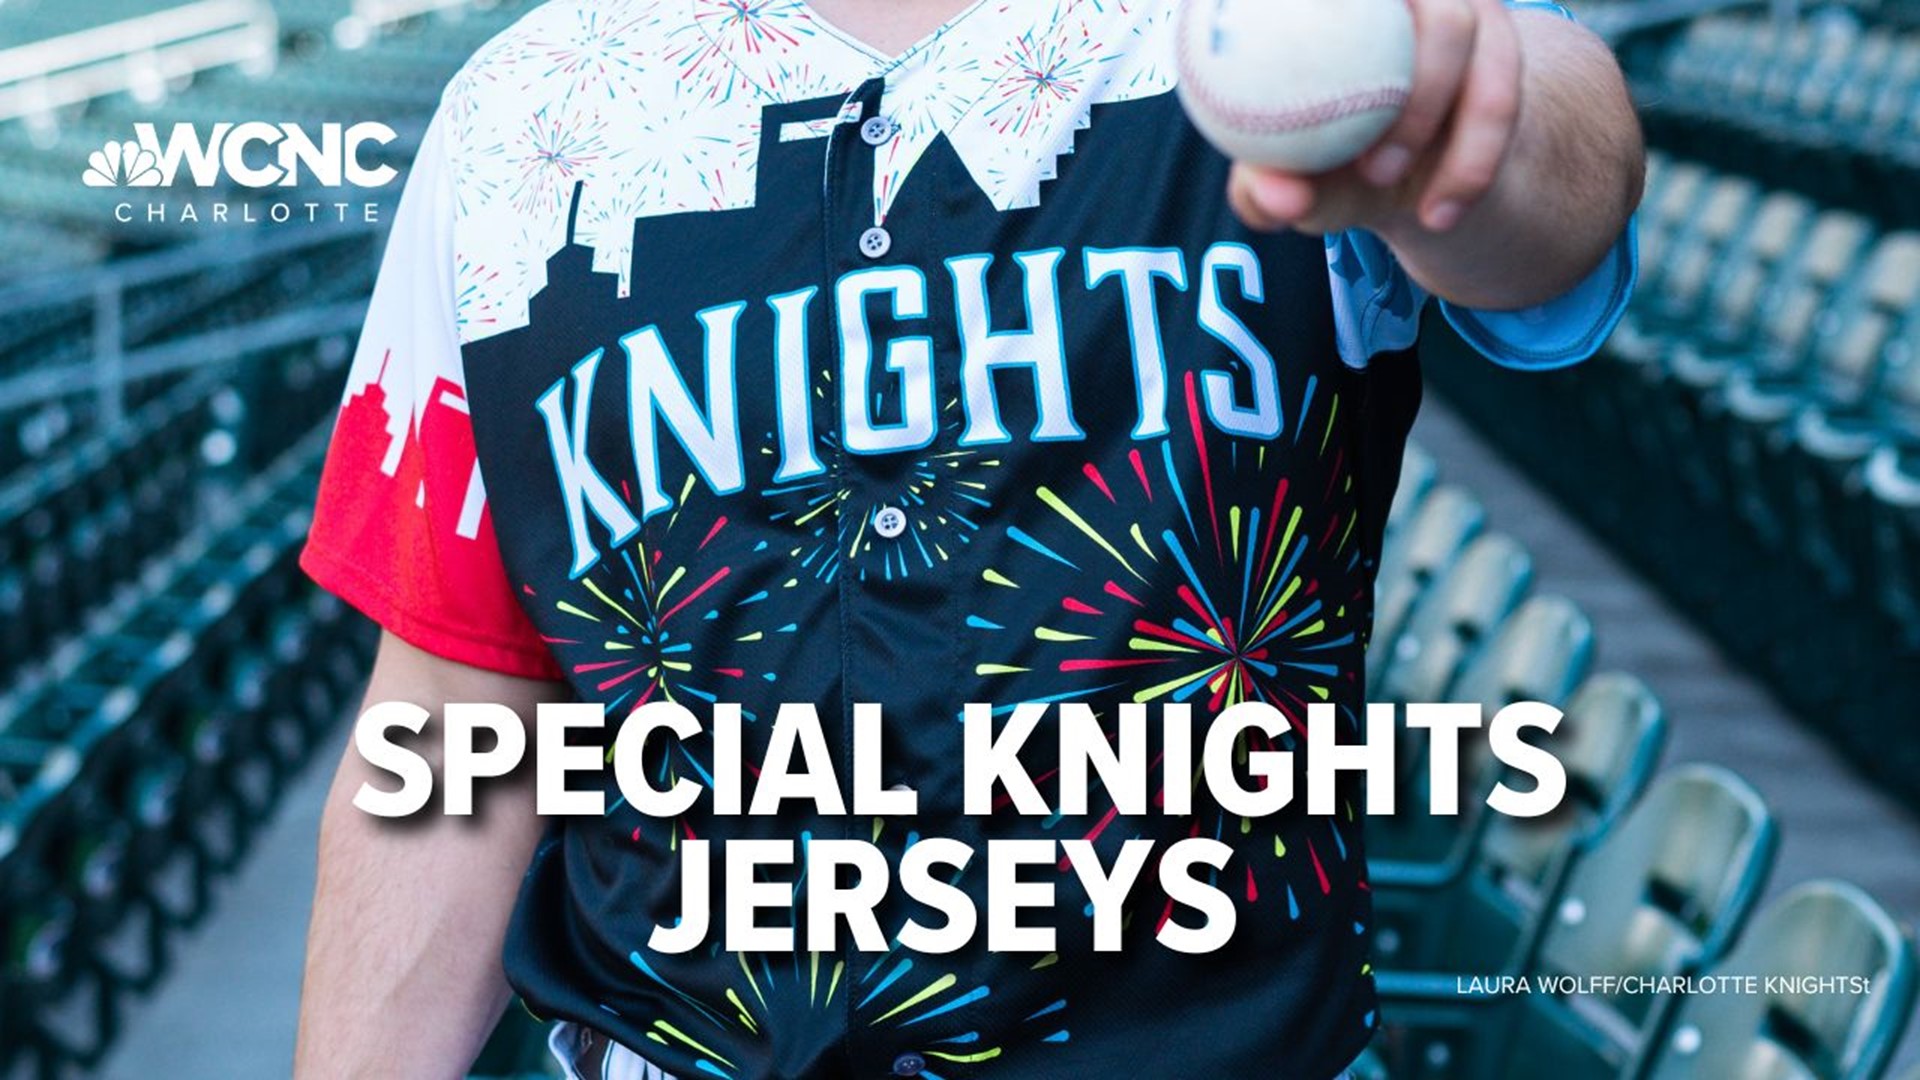 After Saturday night's game, the jerseys will be auctioned off!